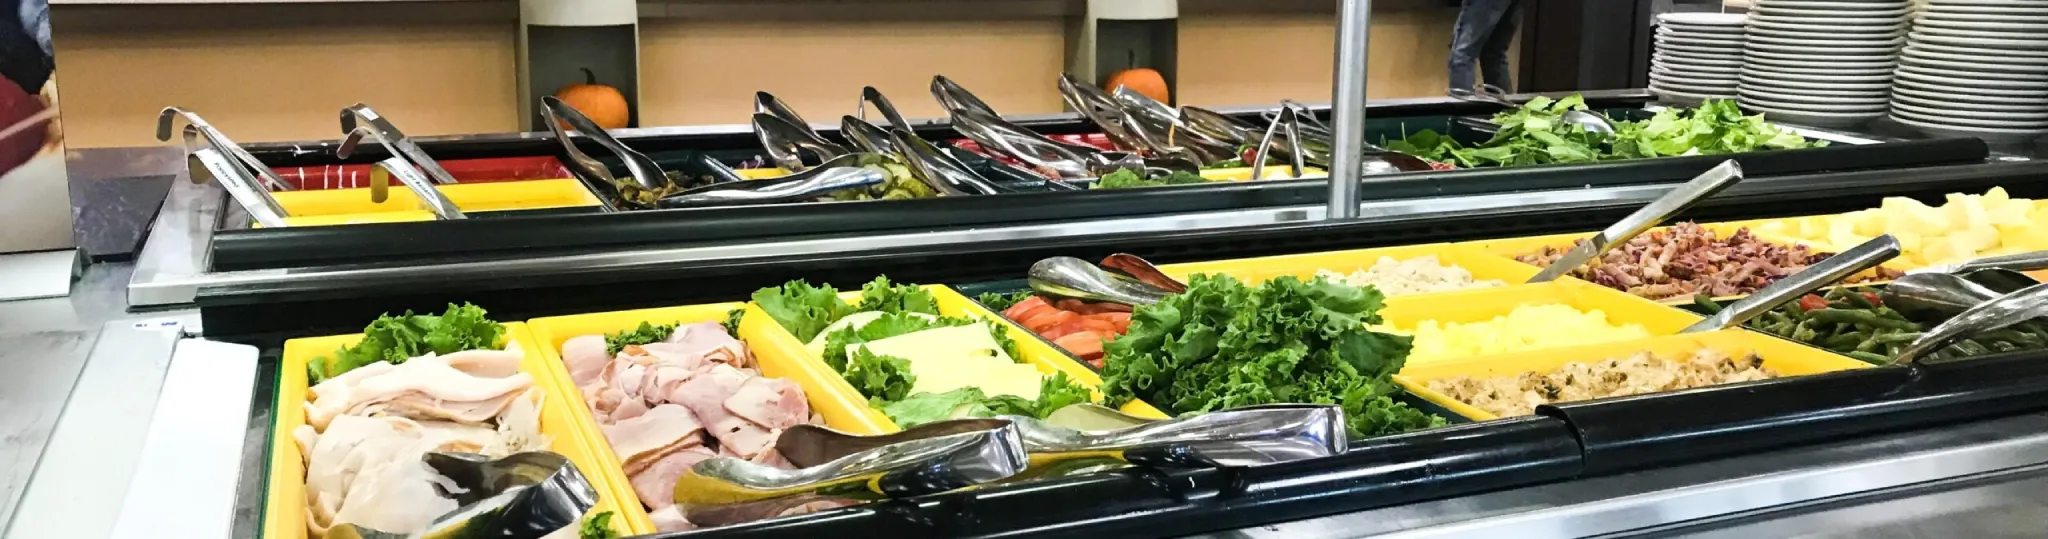 A look at dining options at Arcadia including lunch meat and salad